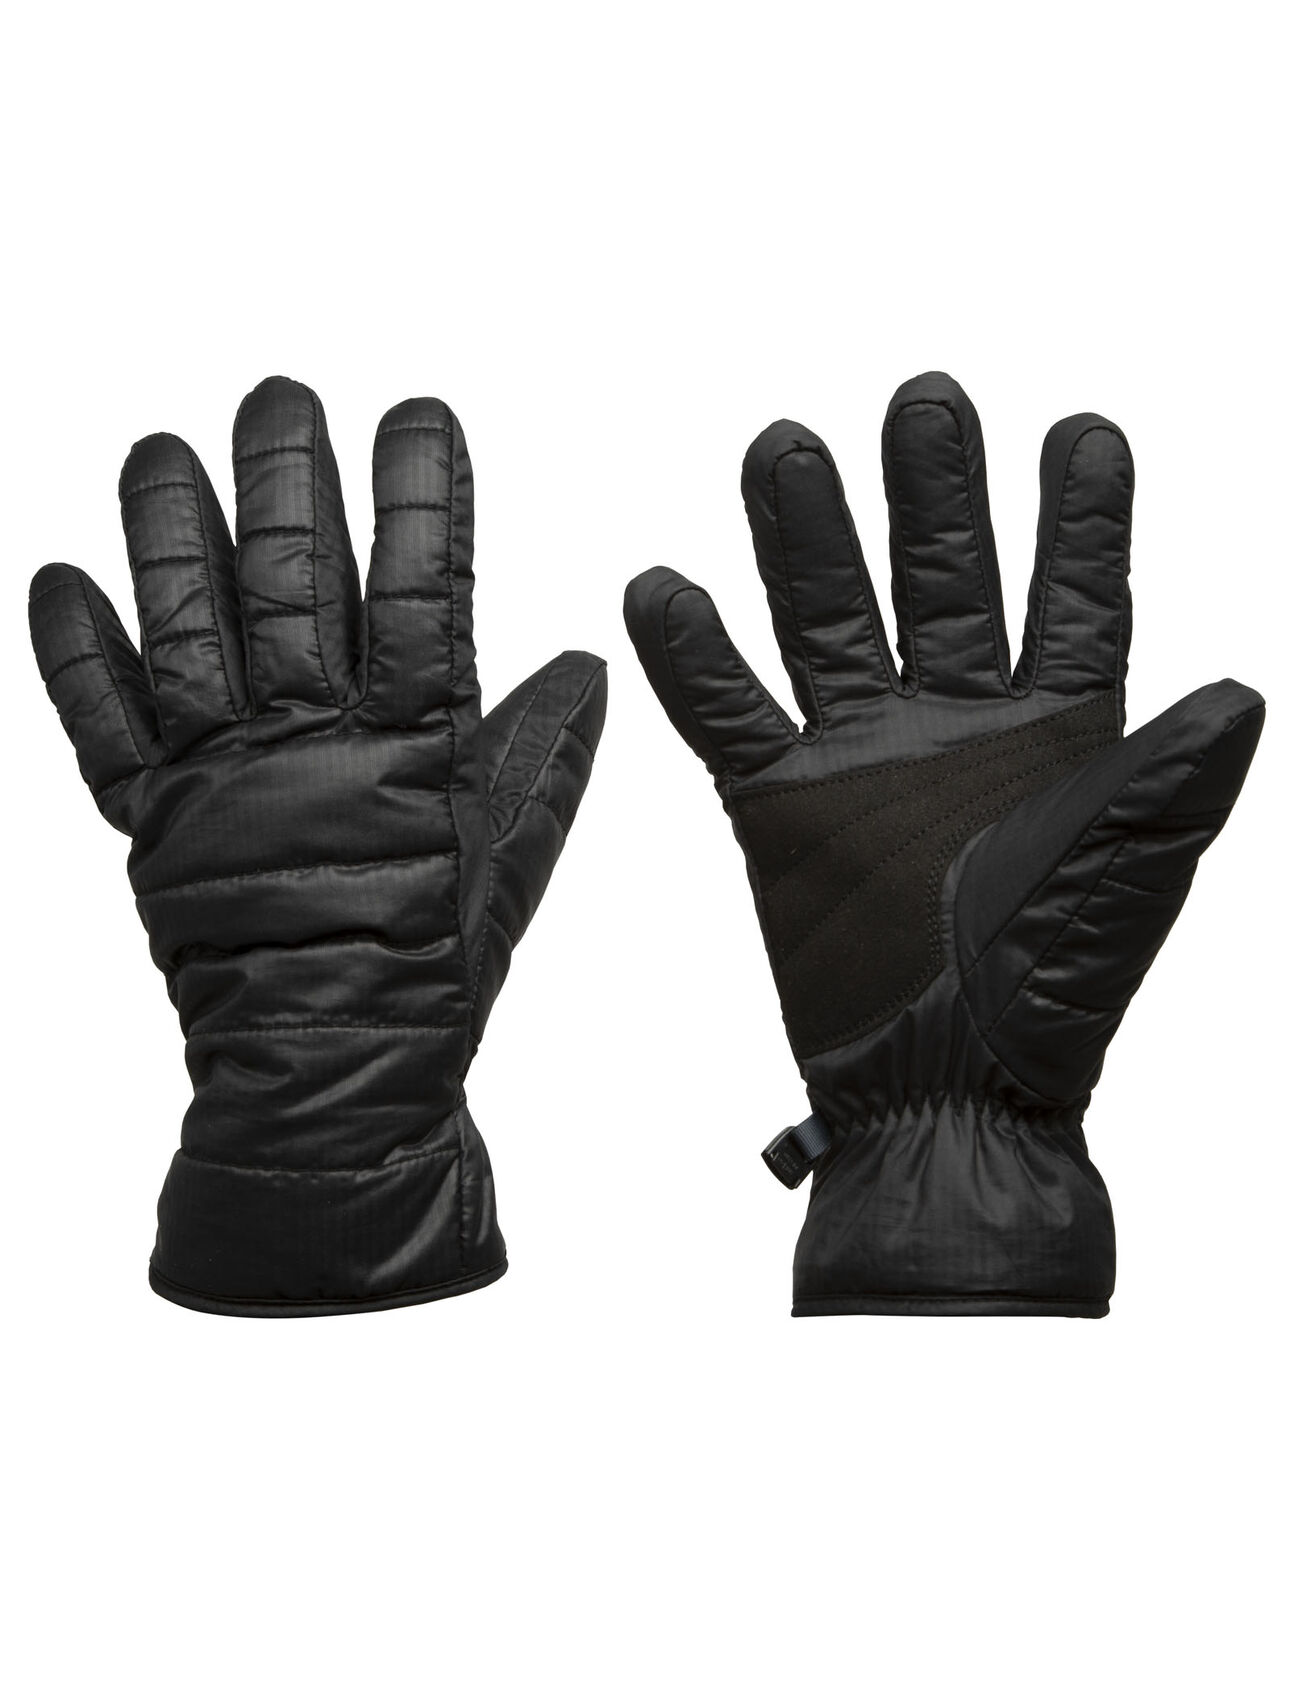 Unisex MerinoLoft™ Collingwood Gloves  Combining our innovative MerinoLoft™ insulation with a durable and weather-resistant recycled shell fabric, the Collingwood Gloves provide warmth and protection from winter conditions. 